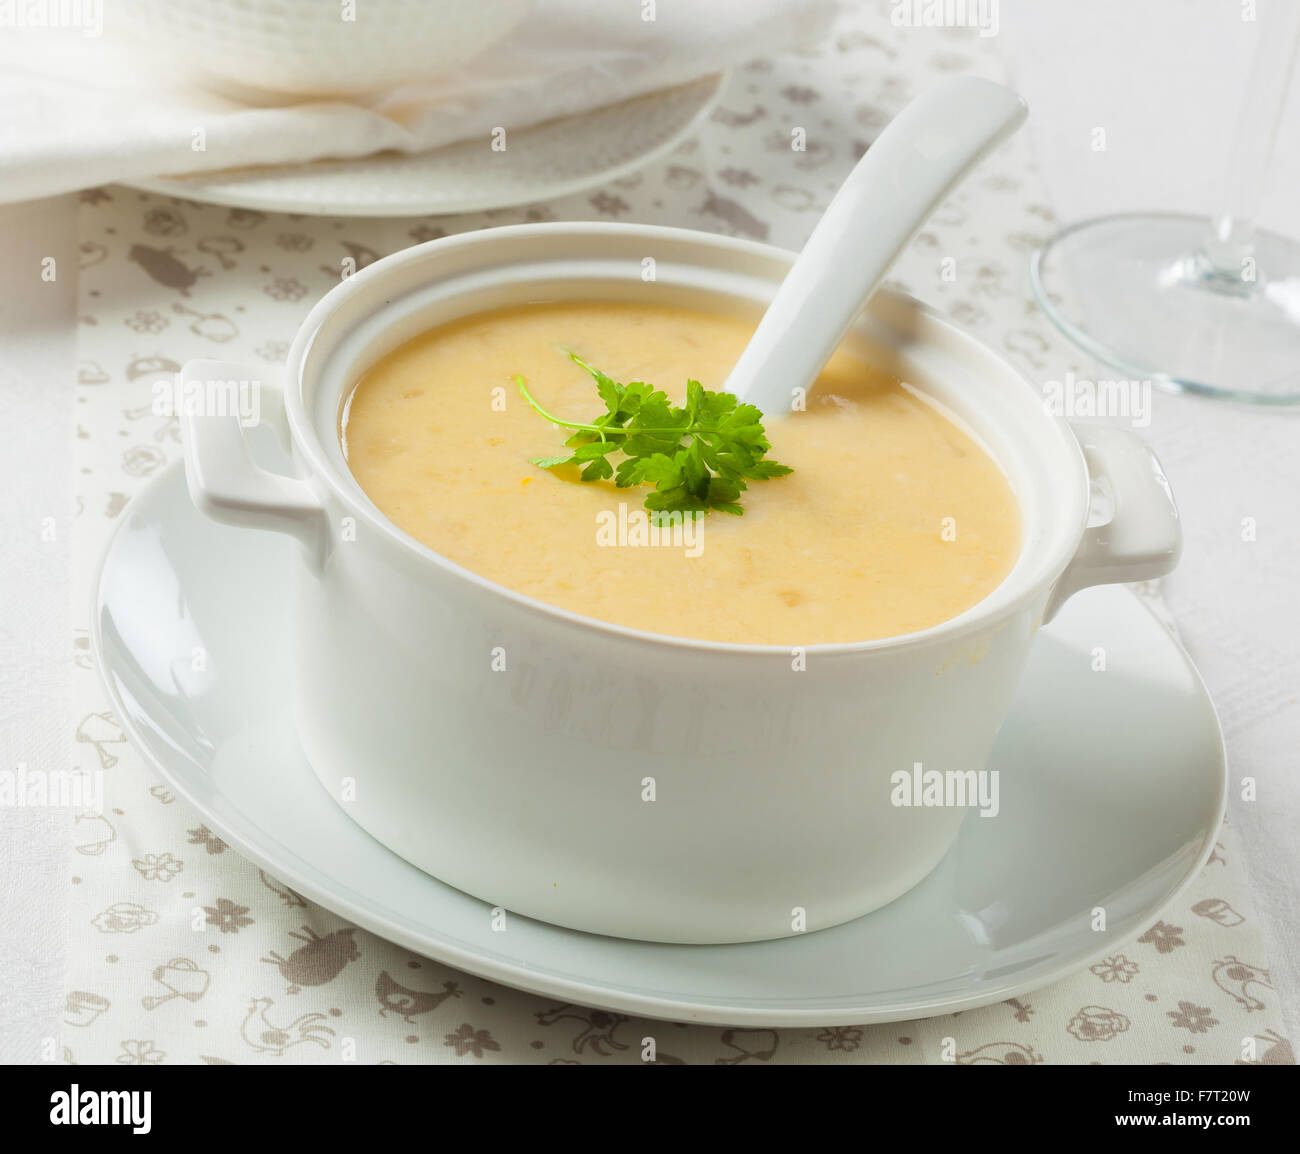 Cream soup in a bowl with a spoon Stock Photo